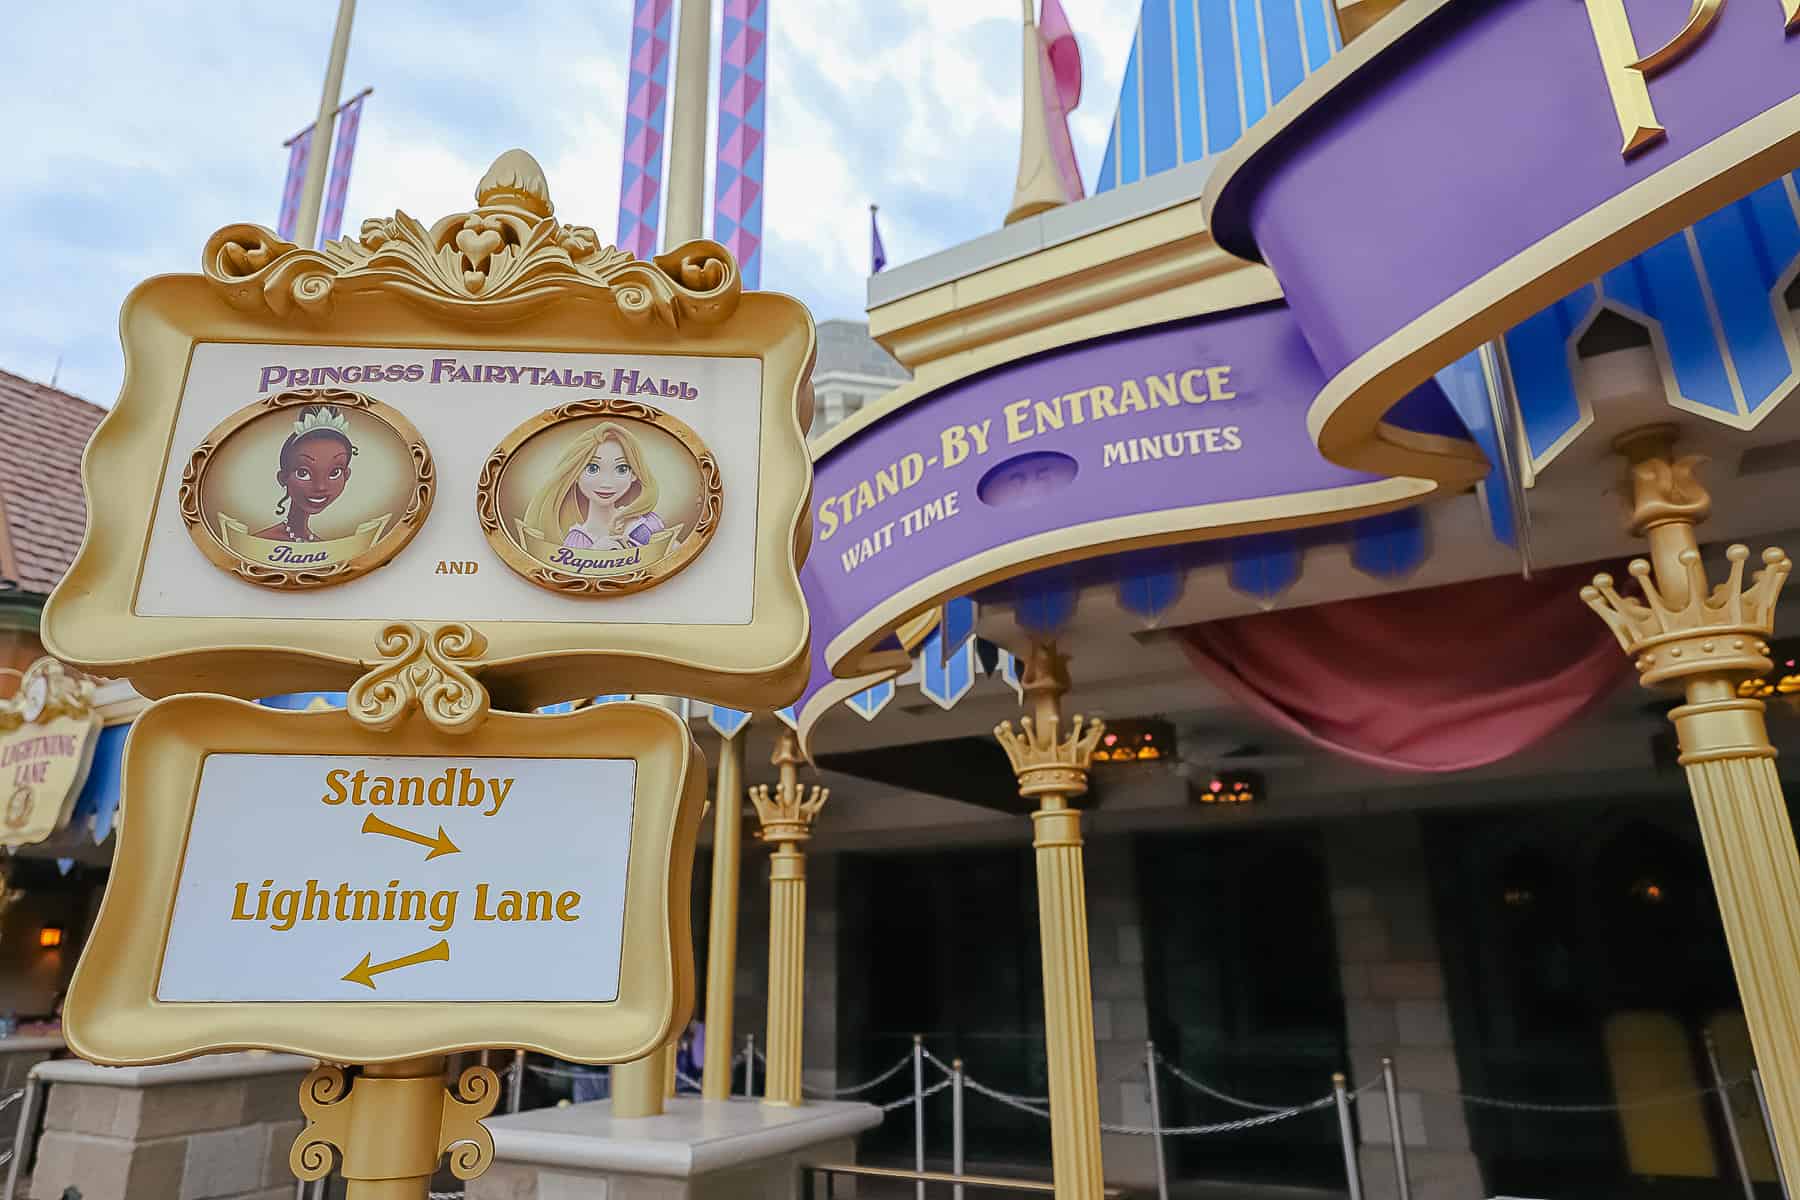 wait times sign for Tiana and Rapunzel 